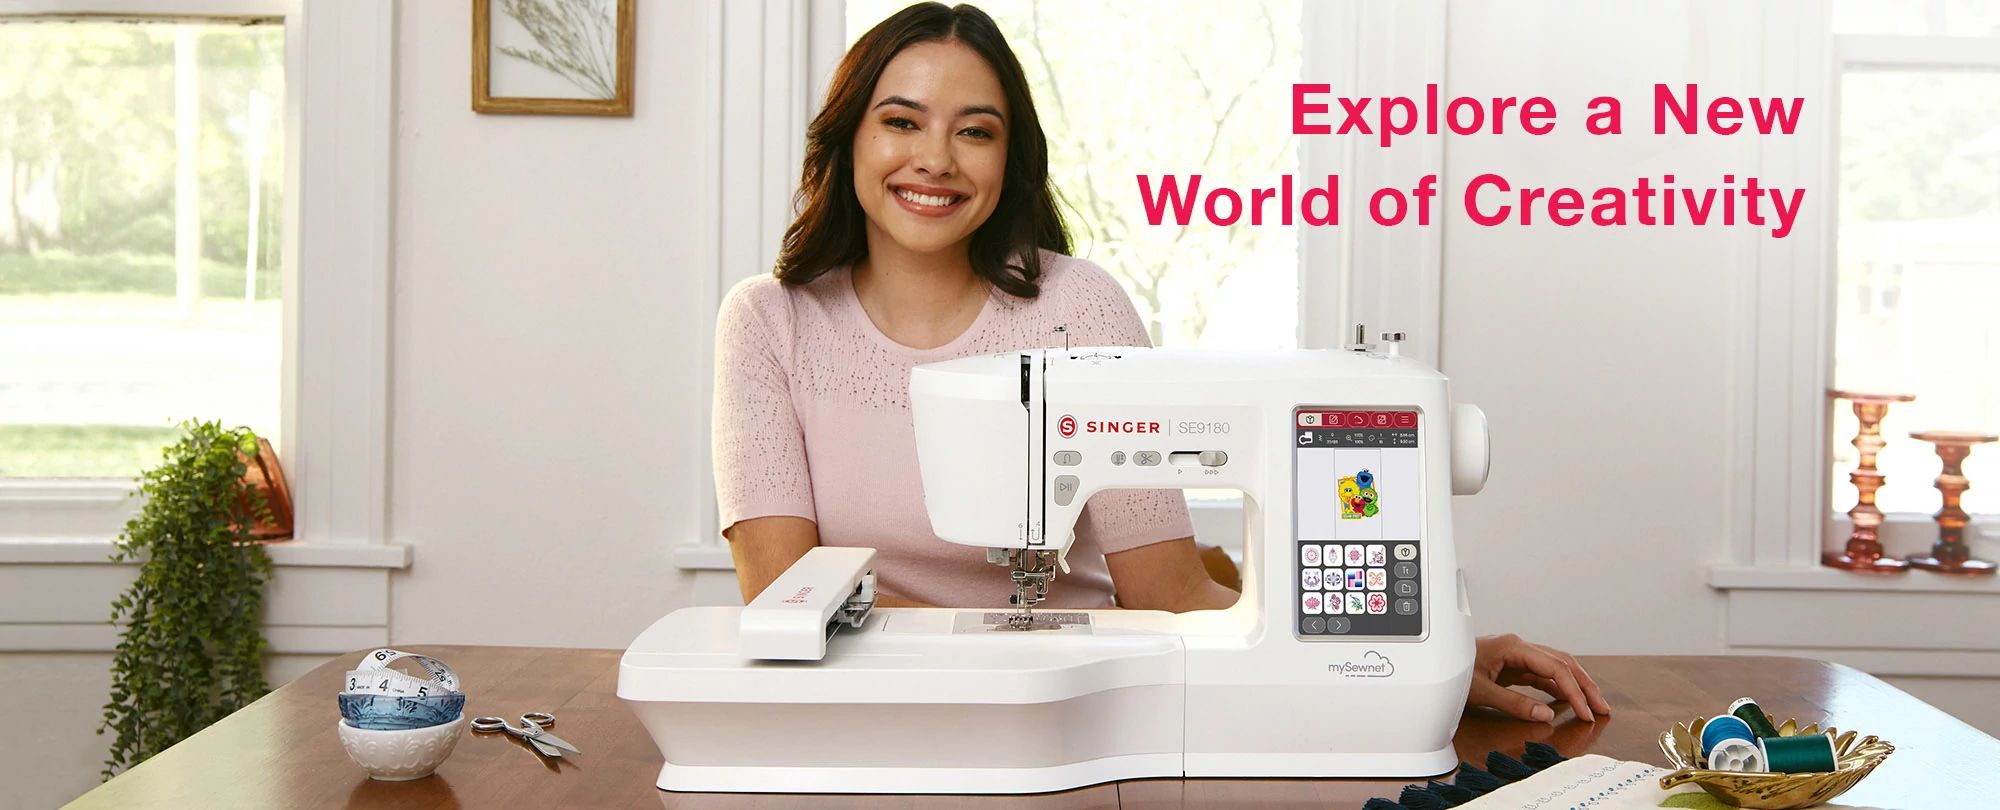 Buy Latest Singer Sewing Machine at Singer India Online Store